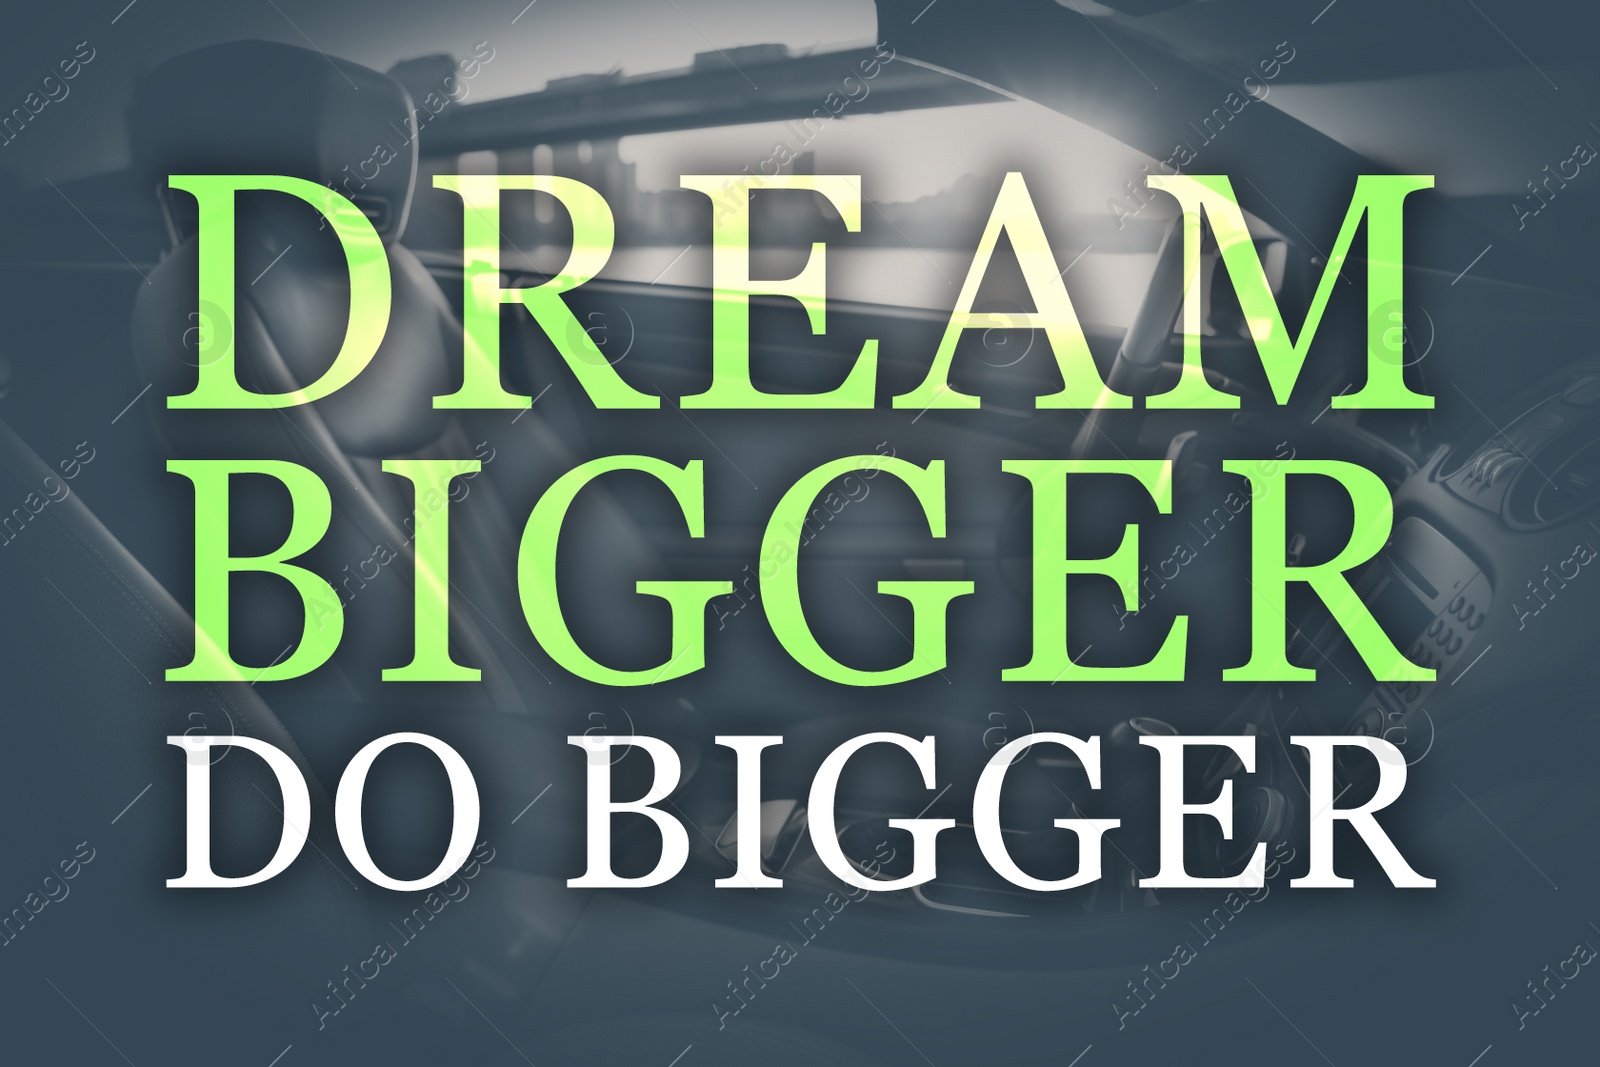 Image of Dream Bigger Do Bigger. Inspirational quote motivating to set life goals freely and forget about reasons that can hold back. Text against luxury car interior